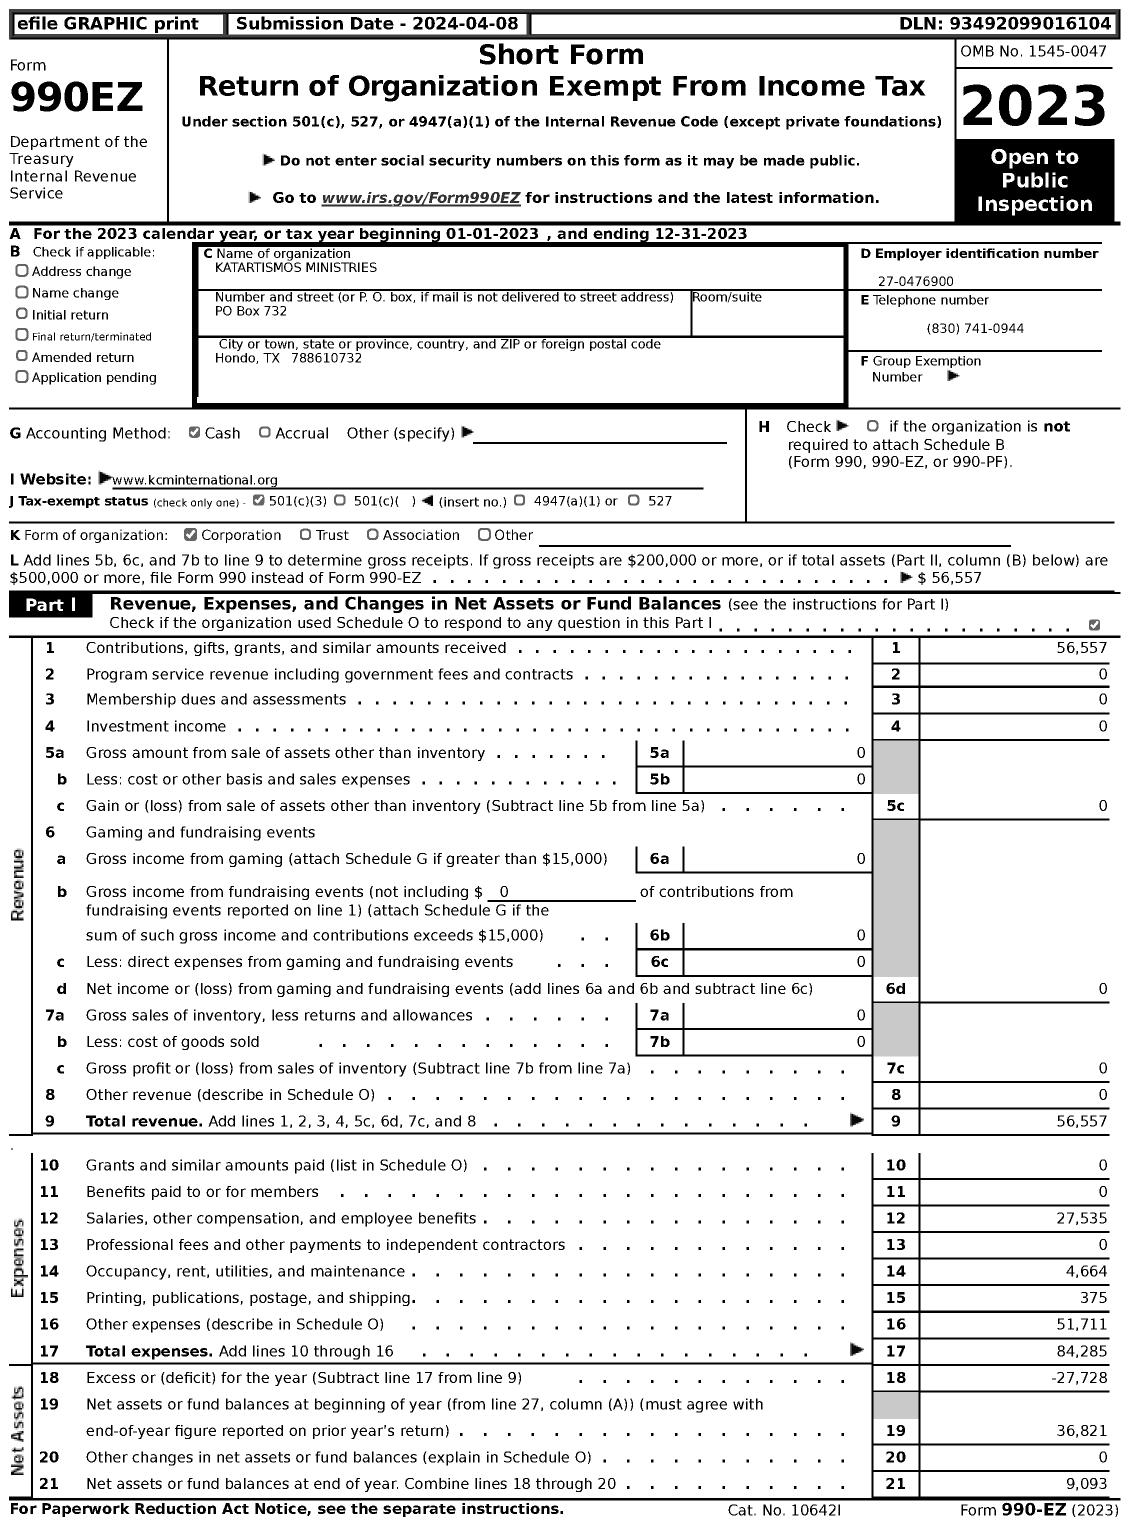 Image of first page of 2023 Form 990EZ for Katartismos Ministries